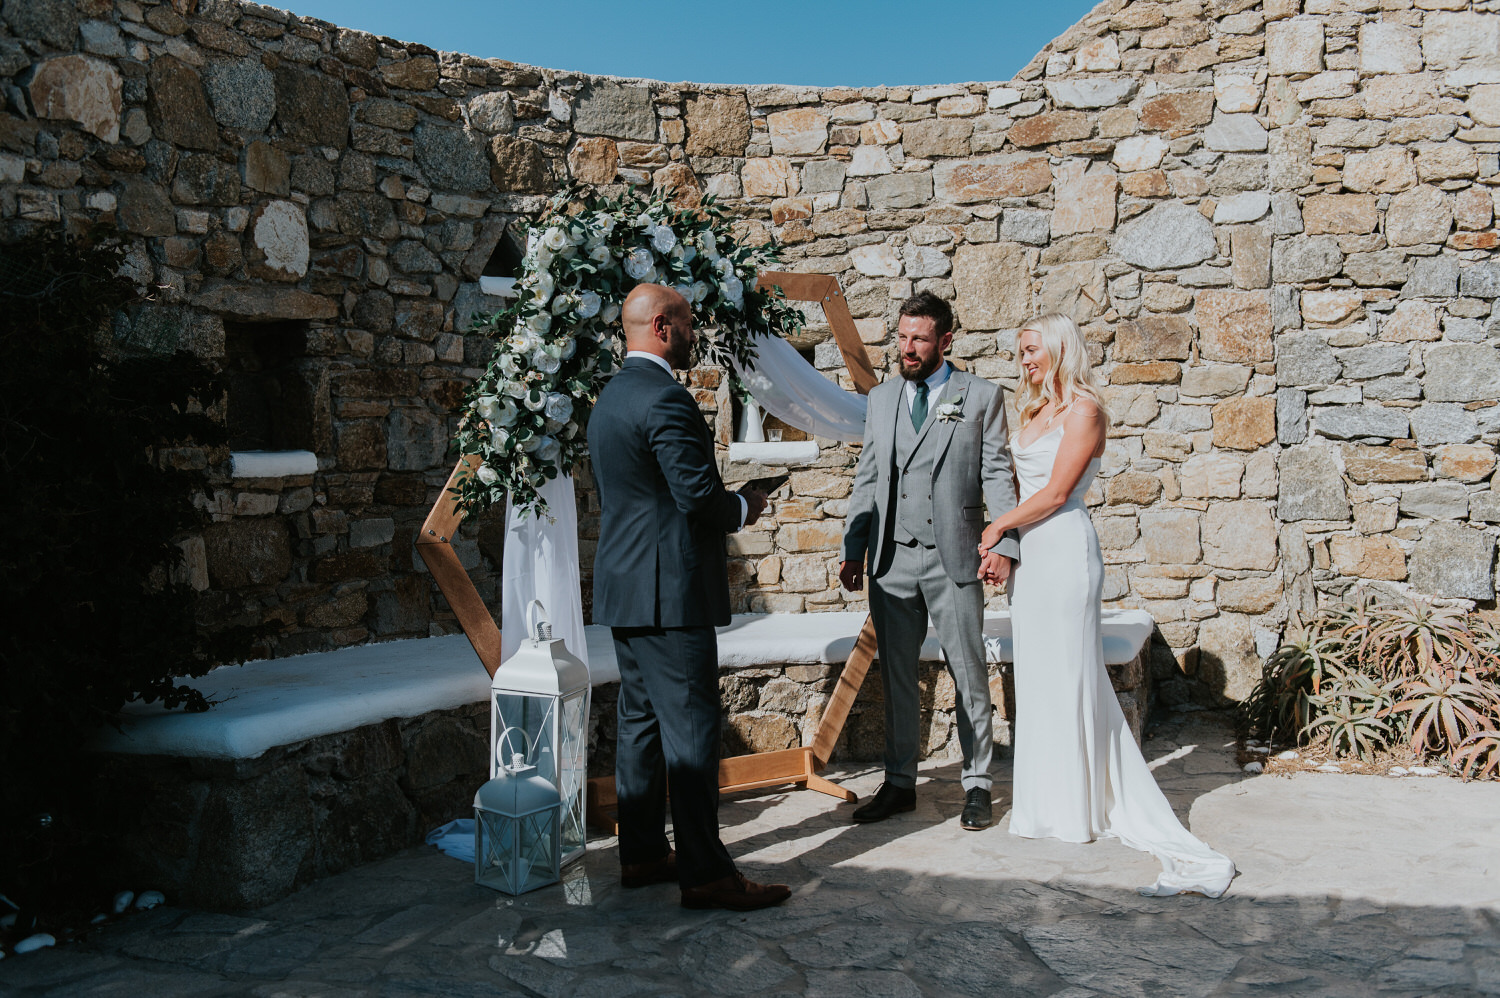 Mykonos wedding photographer: bride and groom holding hands in front of floral arch looking at the celebrant with the rock wall in the background.